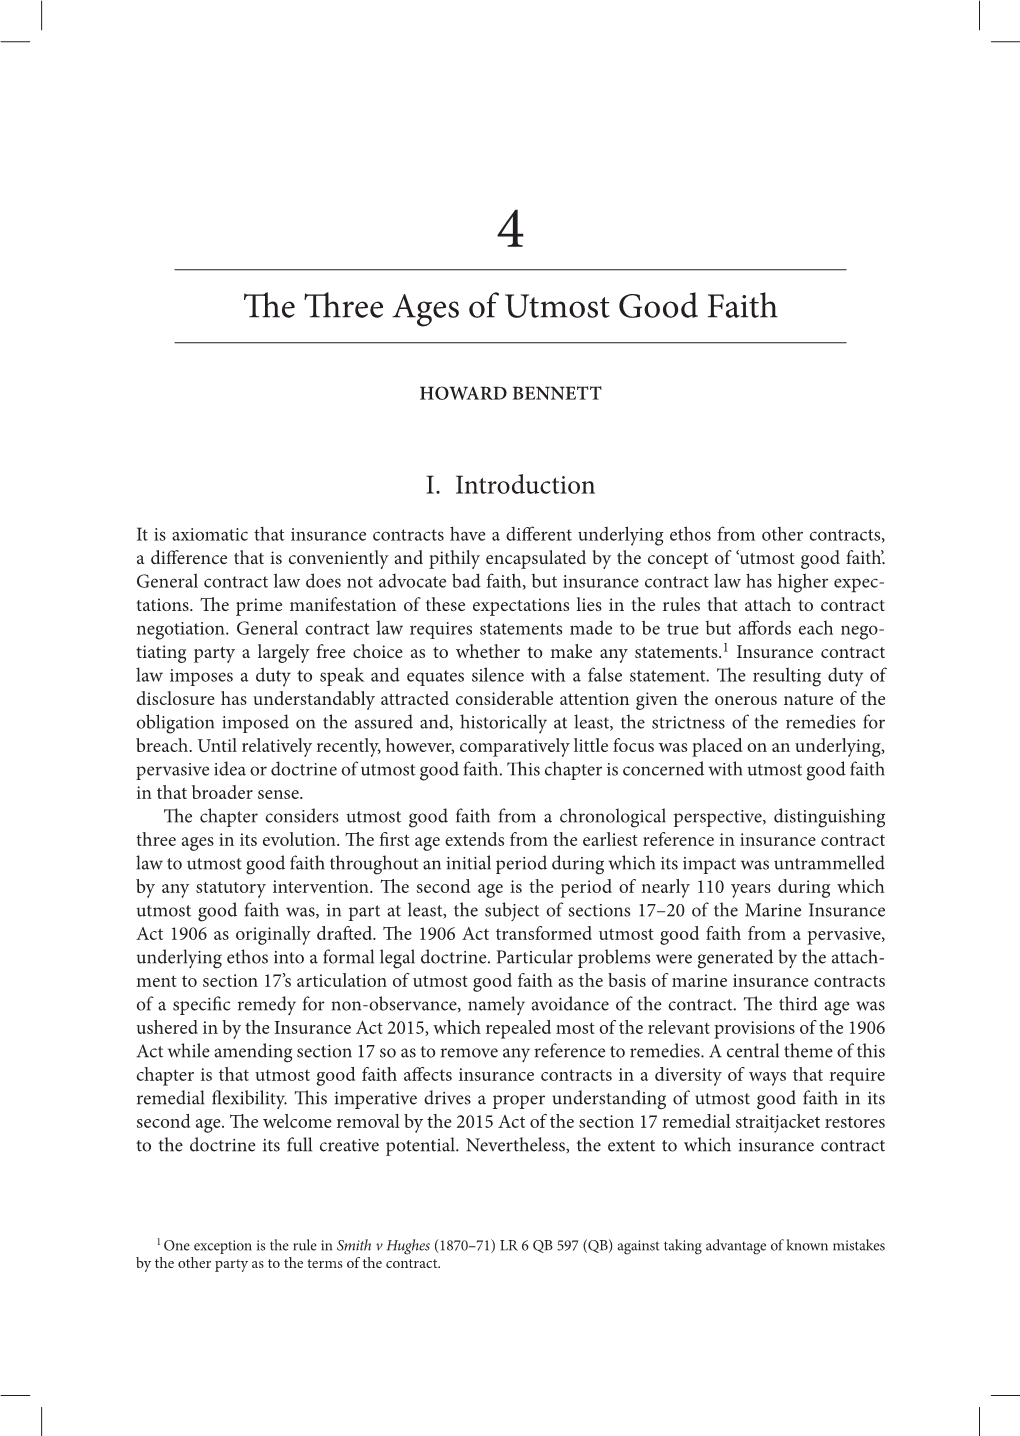 The Three Ages of Utmost Good Faith